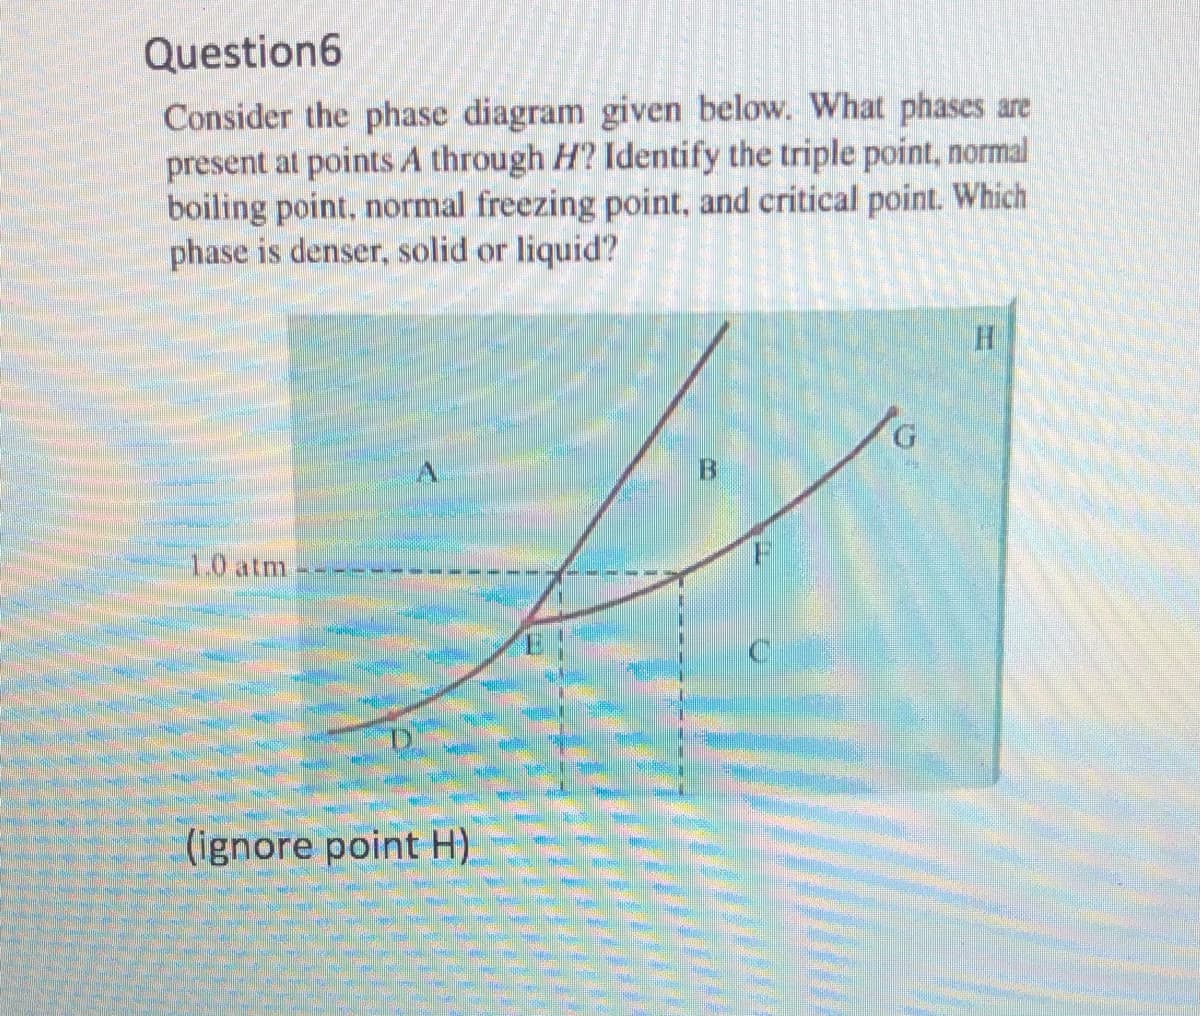 Question6
Consider the phase diagram given below. What phases are
present at points A through H? Identify the triple point, normal
boiling point, normal freezing point, and critical point. Which
phase is denser, solid or liquid?
G.
1.0 atm
(ignore point H)
